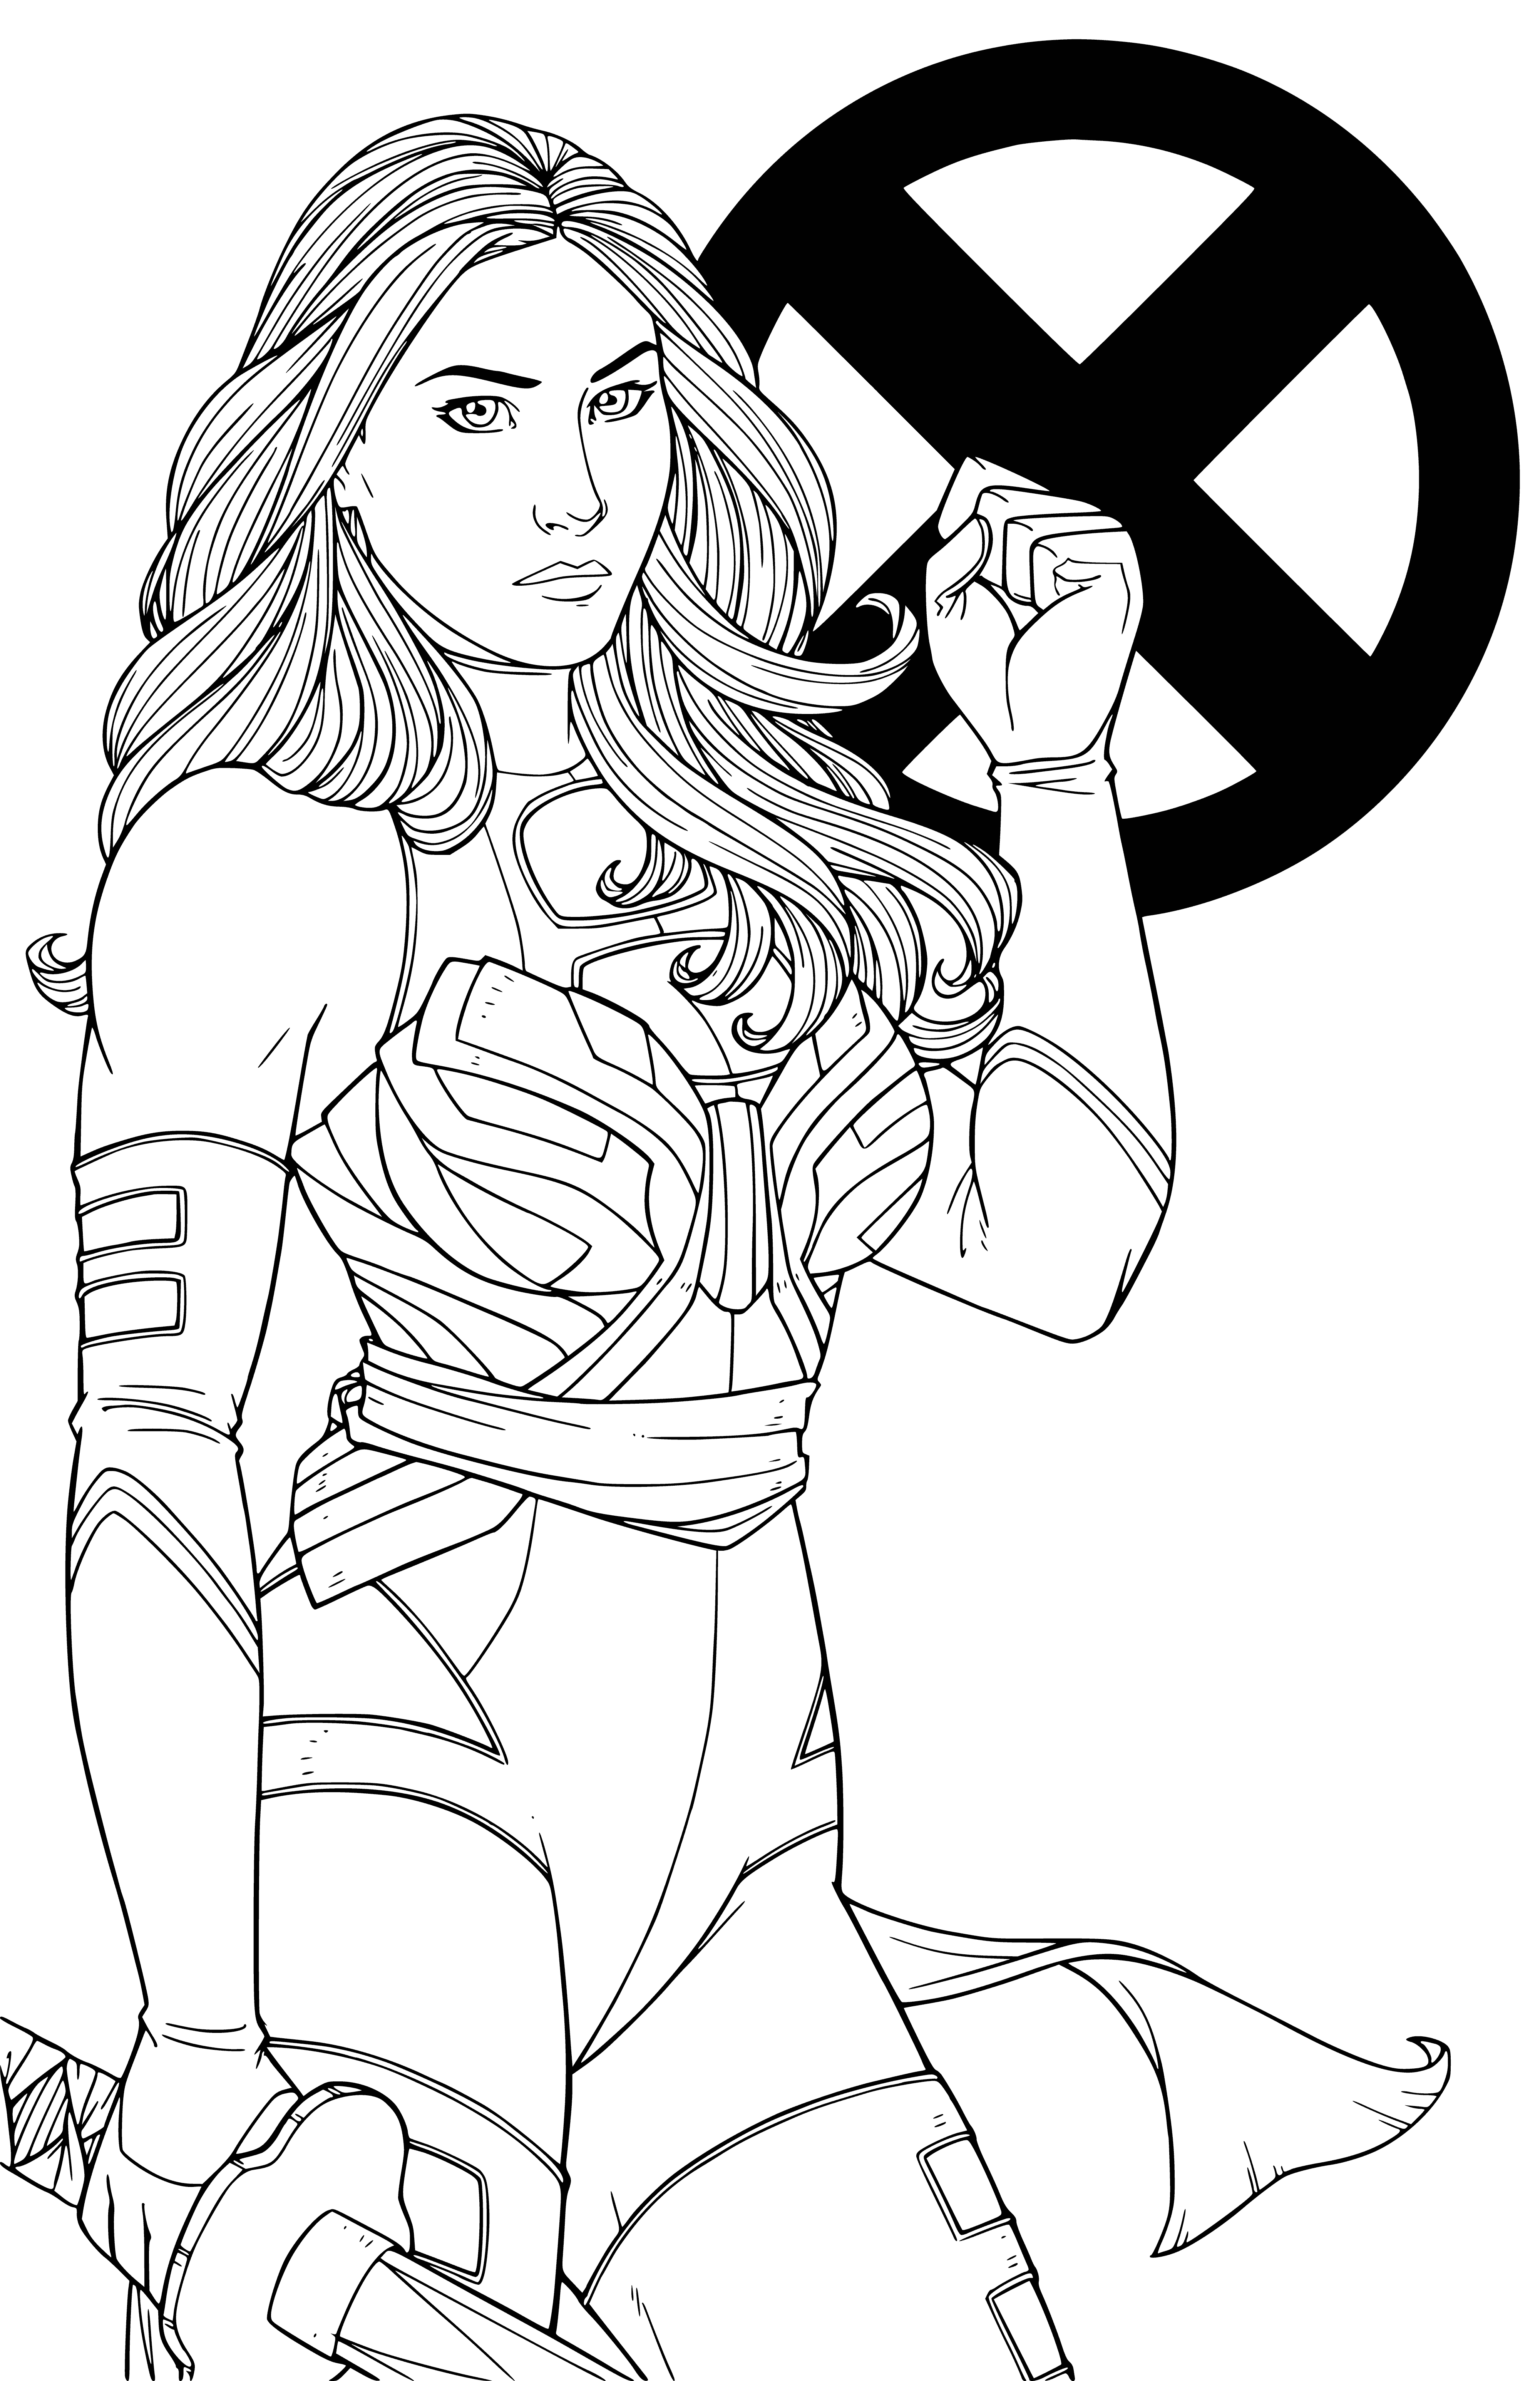 coloring page: Coloring page of Betsy Braddock, a young woman wearing yellow costume and green cape, with long blonde hair and blue eyes (from Superheroes movie).